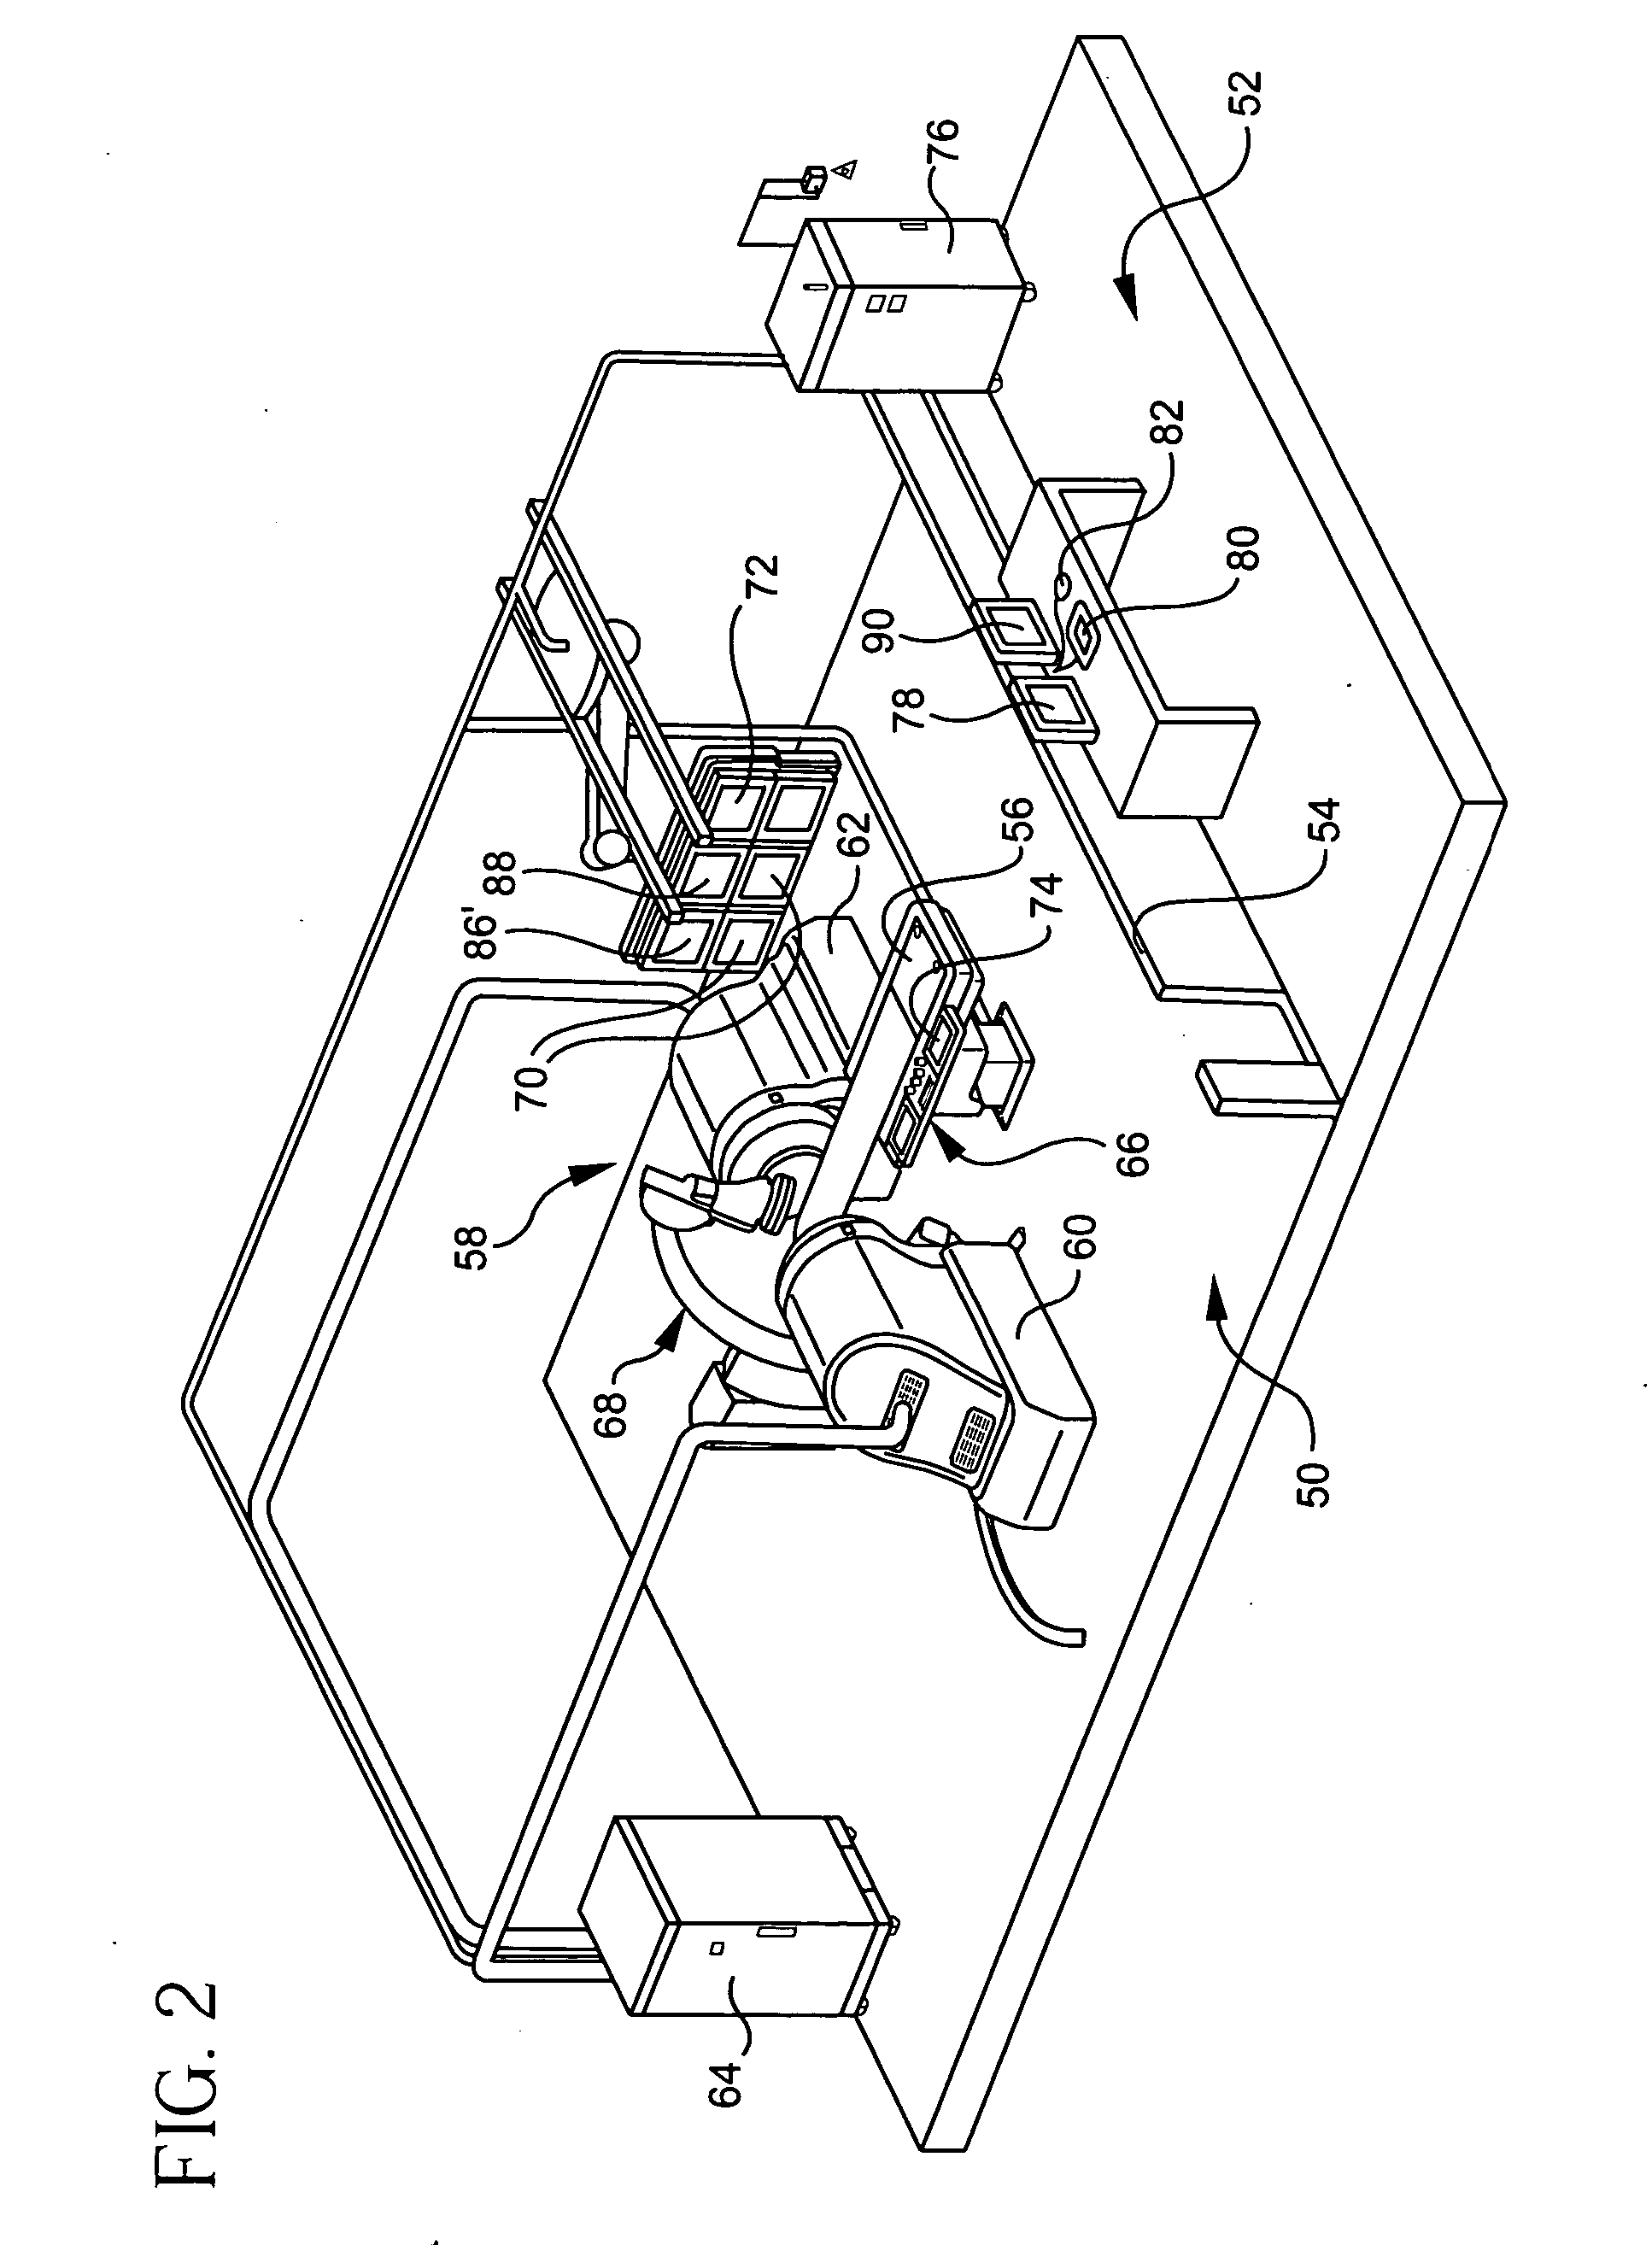 User interface for remote control of medical devices